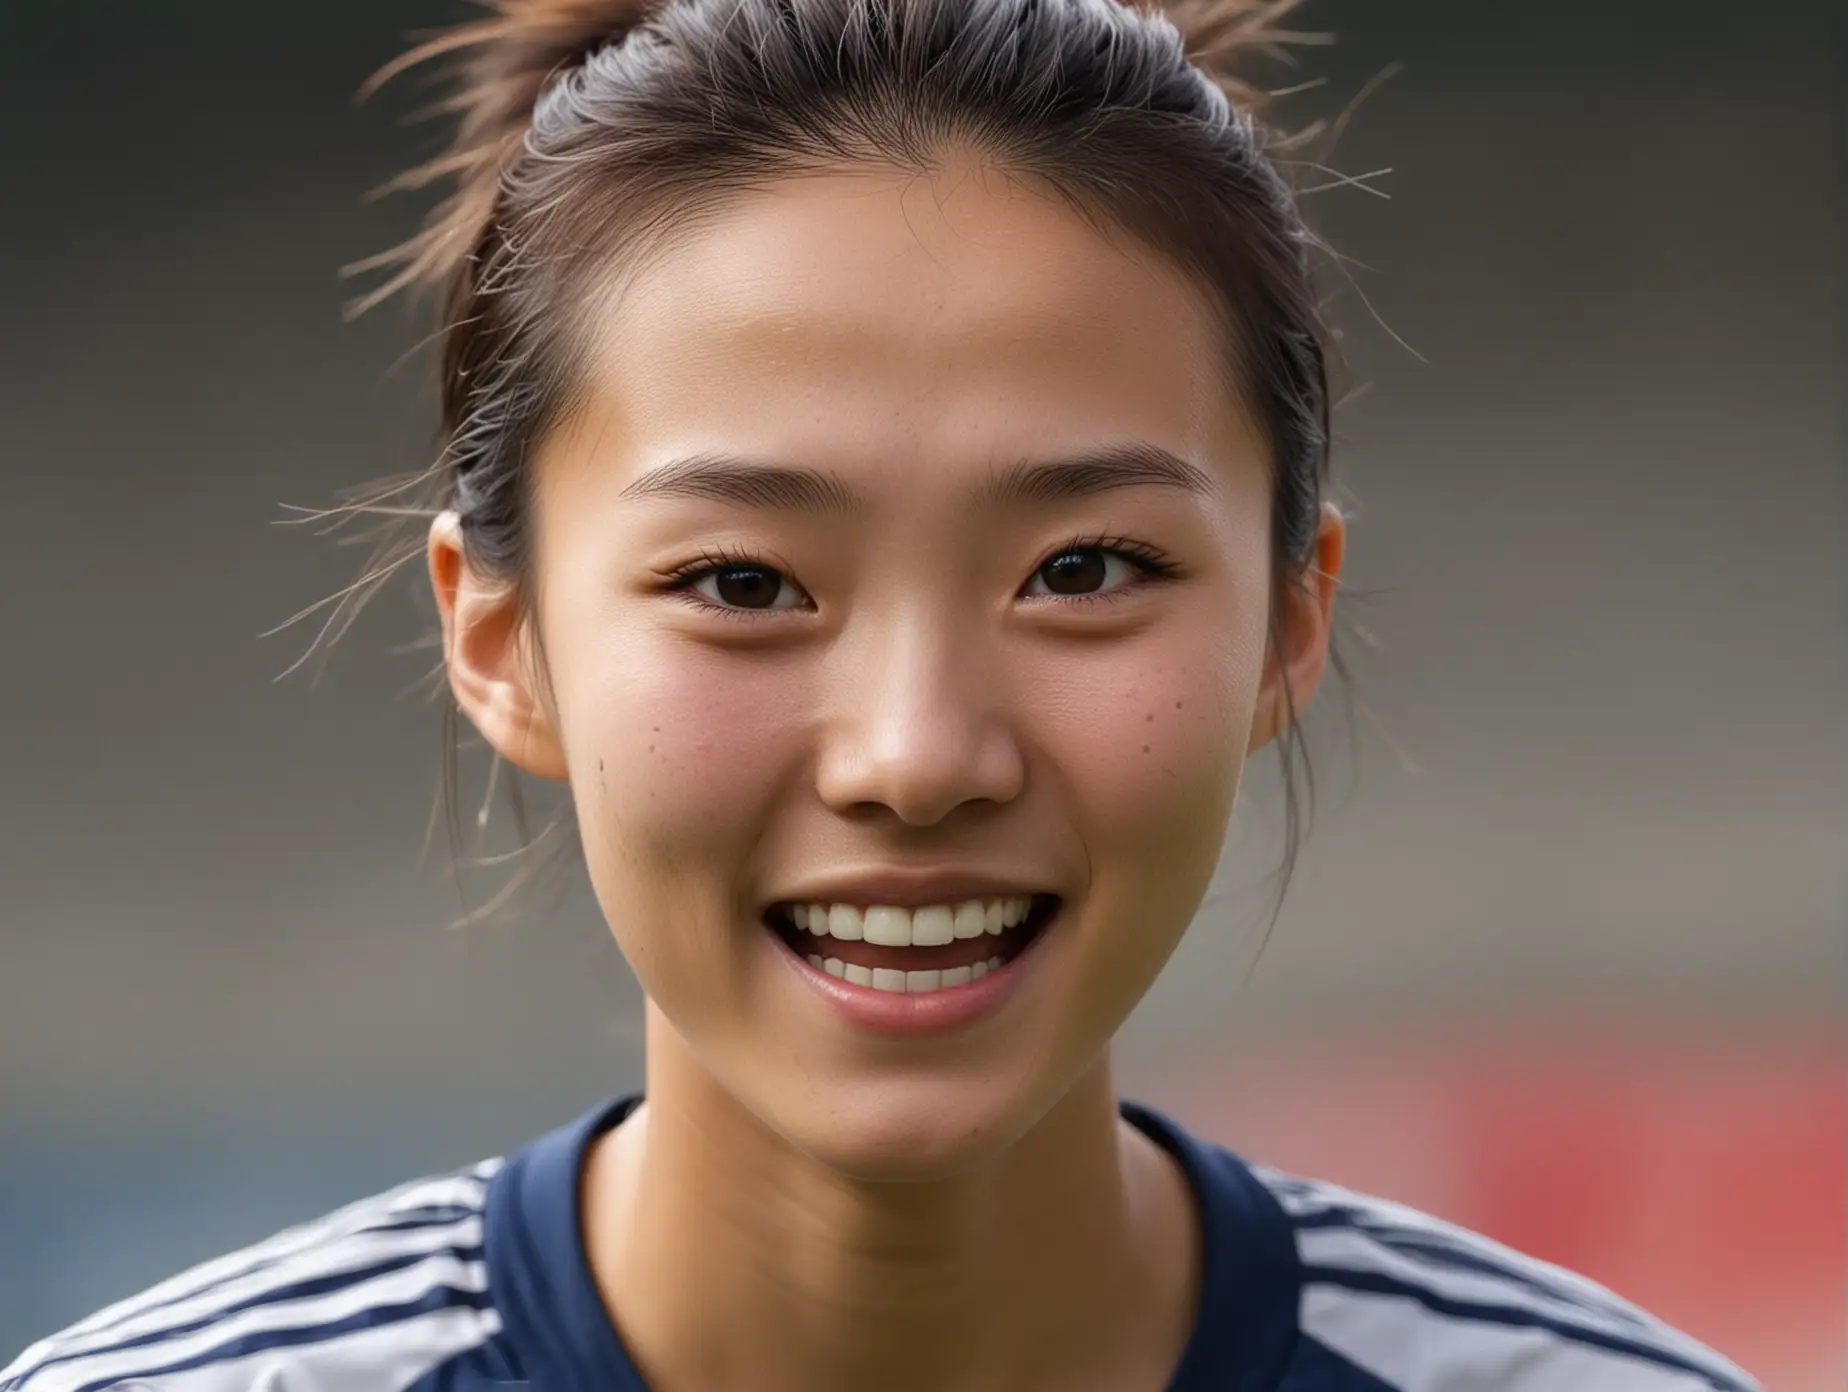 Close up natural face without make-up of a beautiful very skinny 20 year old Chinese female soccer player celebrating a goal with fiercely intense eyes and a joyful smile.